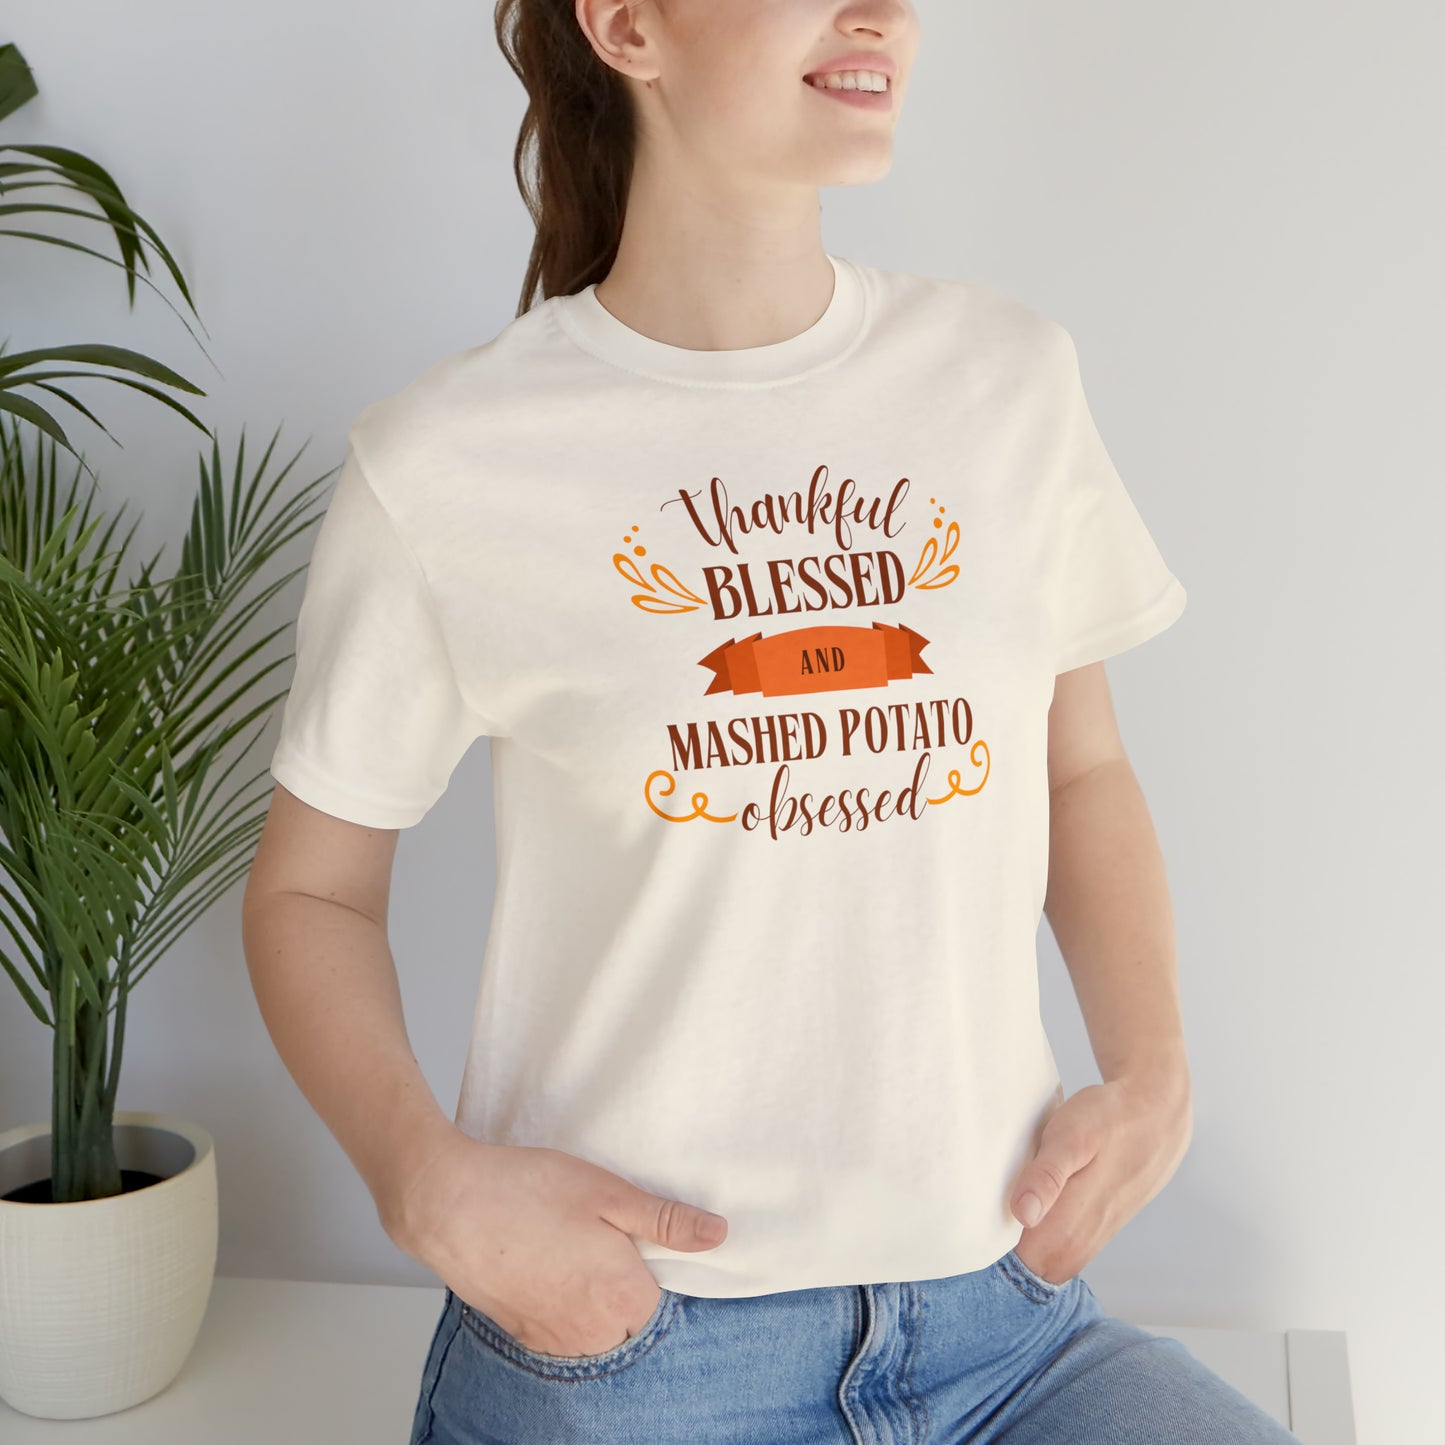 Mashed Potato Obsessed Tee